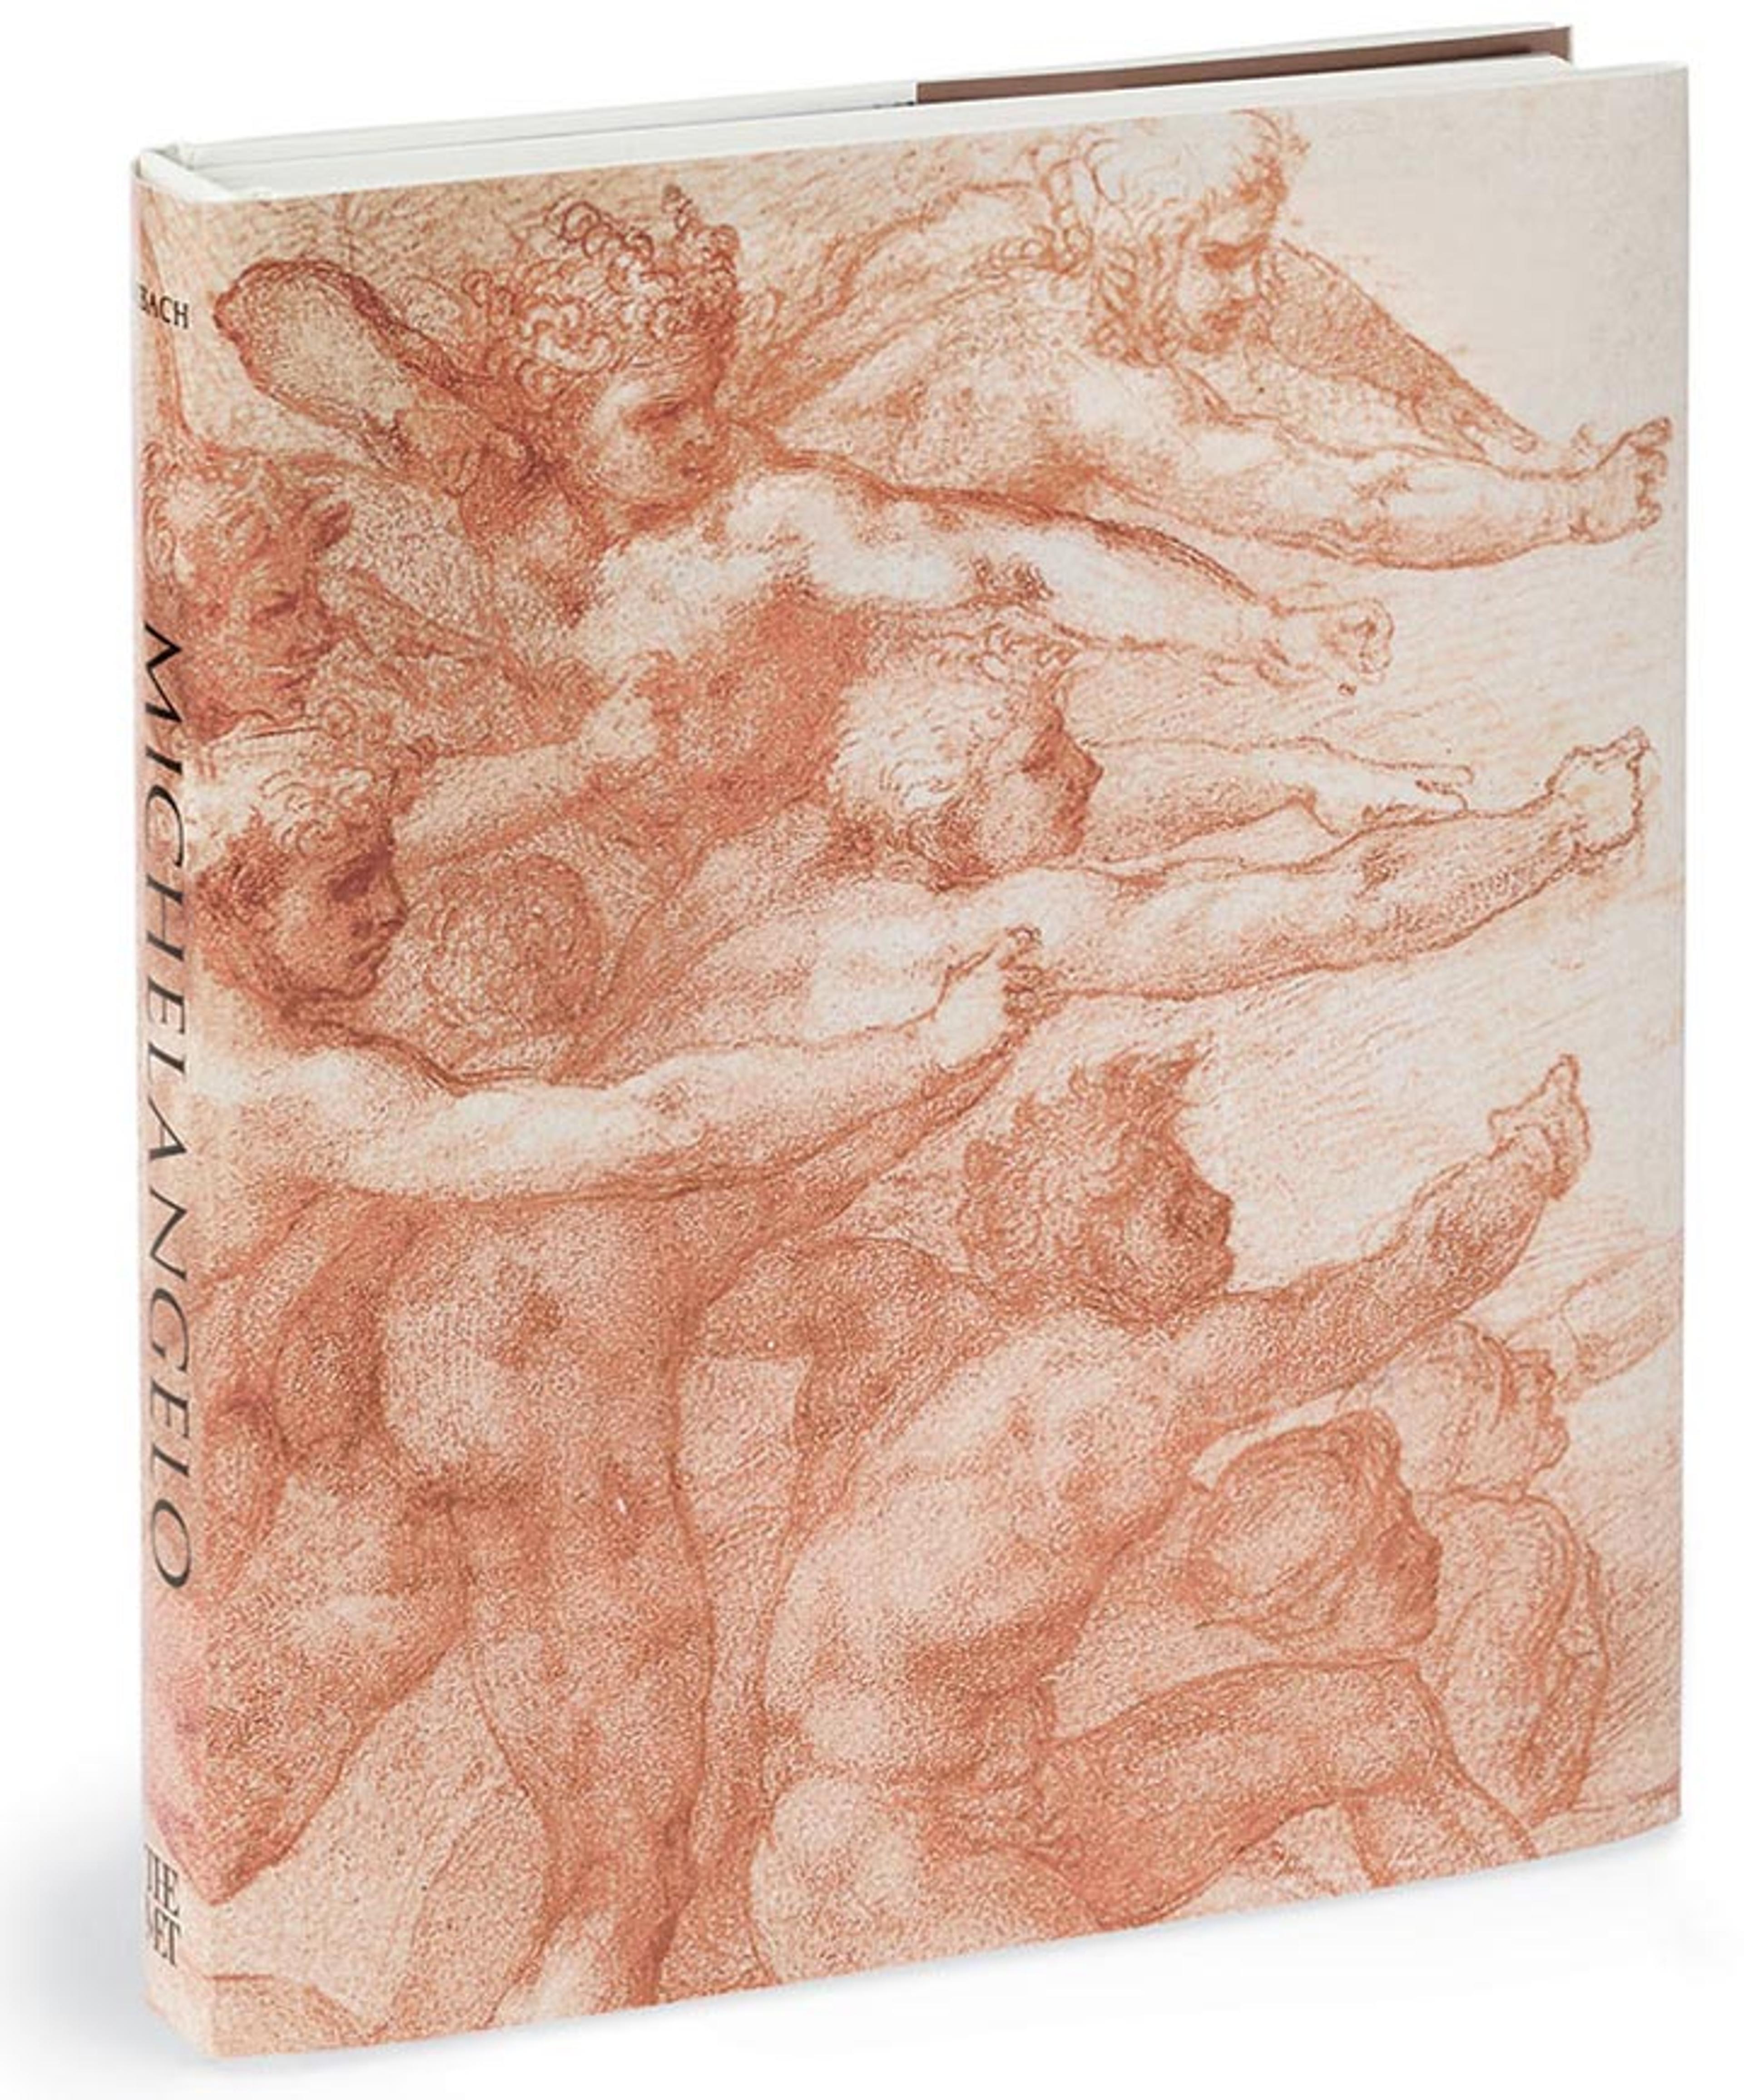 Cover of the book "Michelangelo: Divine Draftsman and Designer"